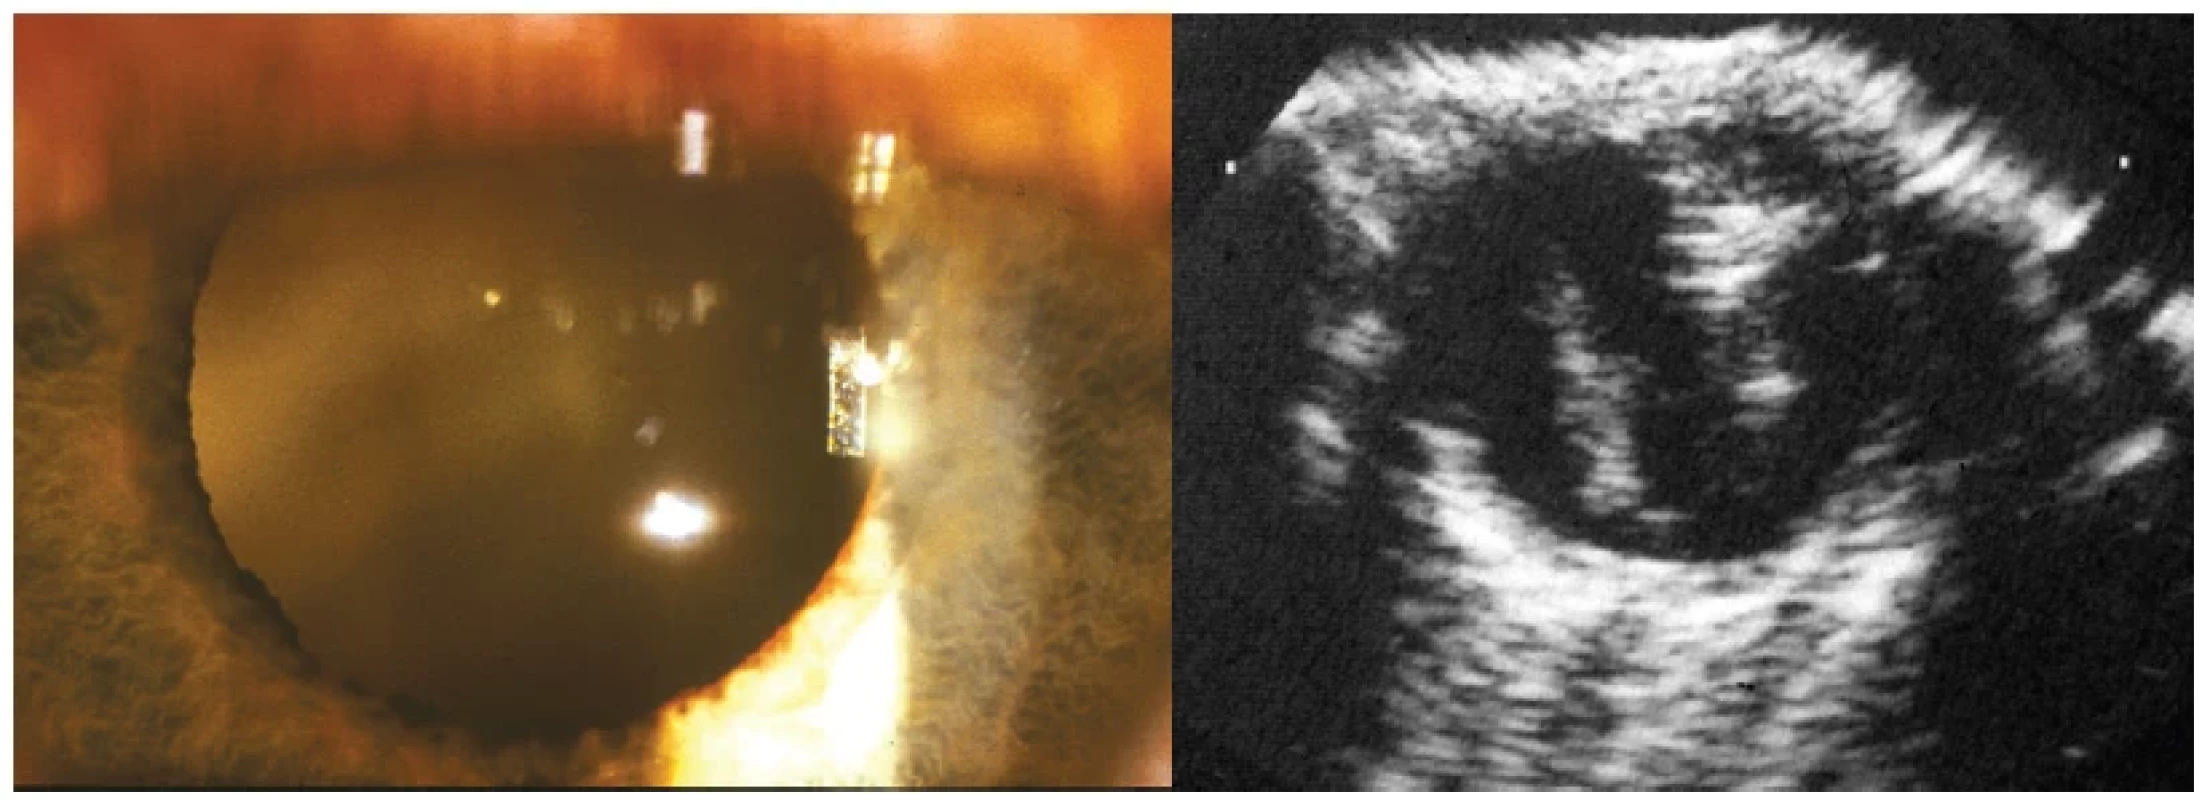 Left: Opacites of vitreous body of toxocara etiology visible retrolentally
Right: Ultrasound image of toxocara endophthalmitis with inflammatory conglomerates of the vitreous body and tractional streak running from the papilla to the periphery of retina
